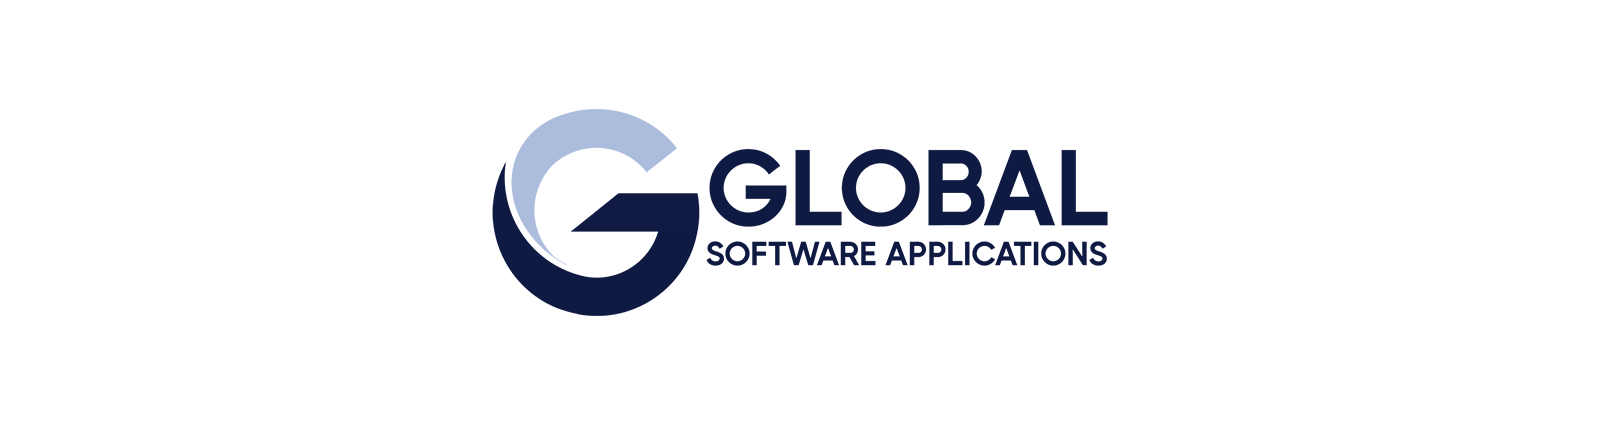 Global Software Applications